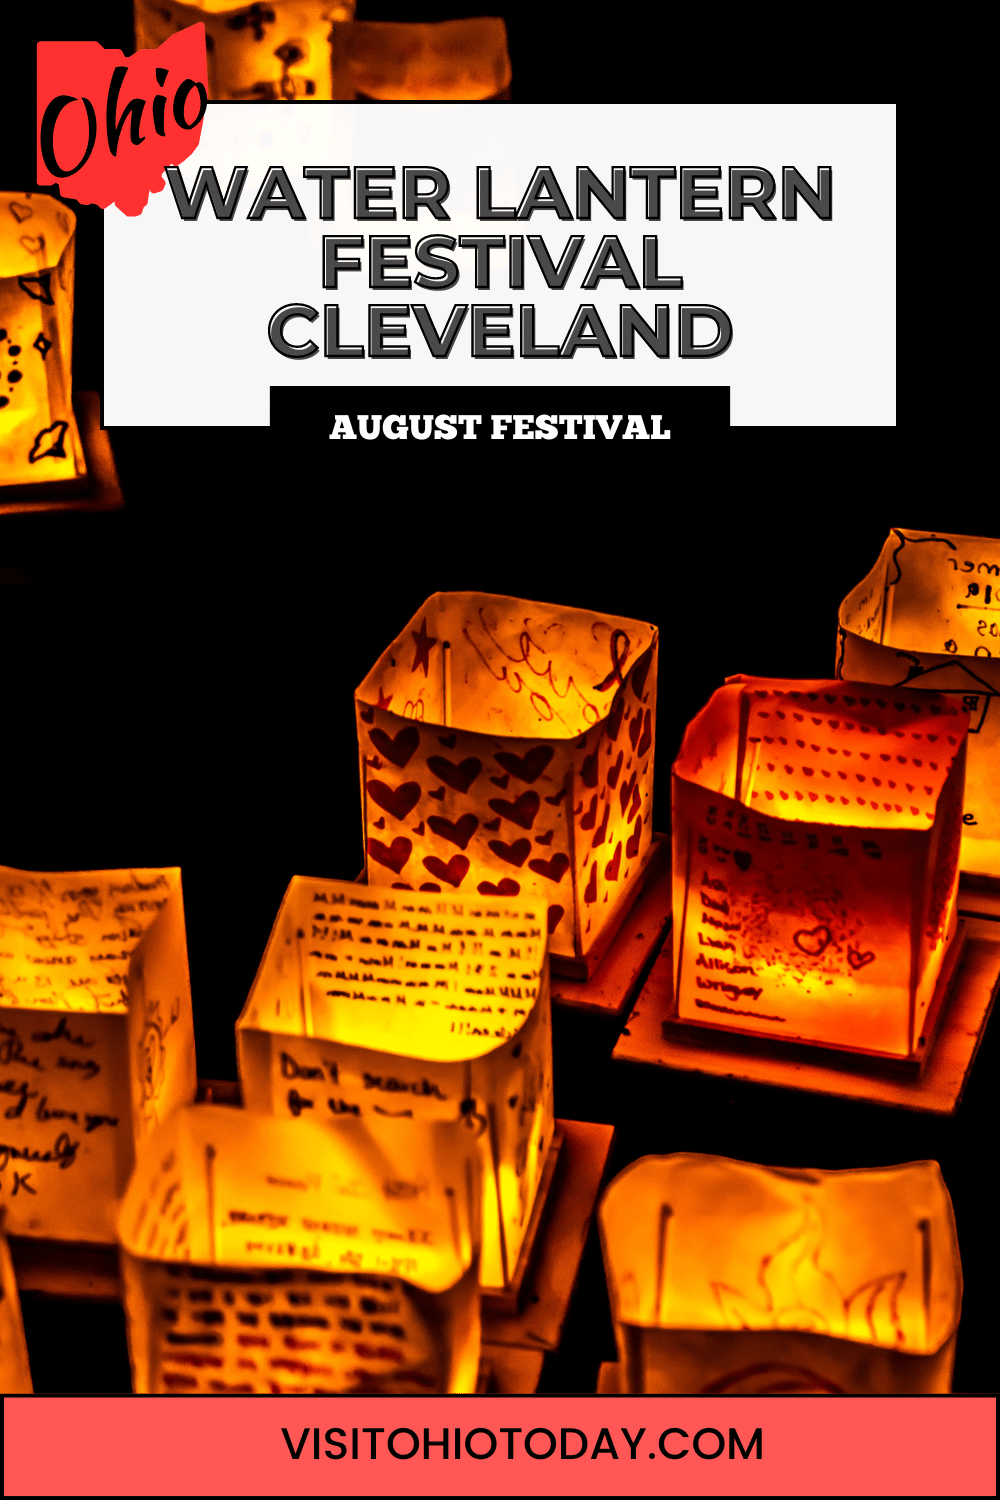 The Water Lantern Festival Cleveland is a heartfelt event where lanterns are released onto the water to celebrate life. It occurs in late August at Coe Lake Park in Cleveland.